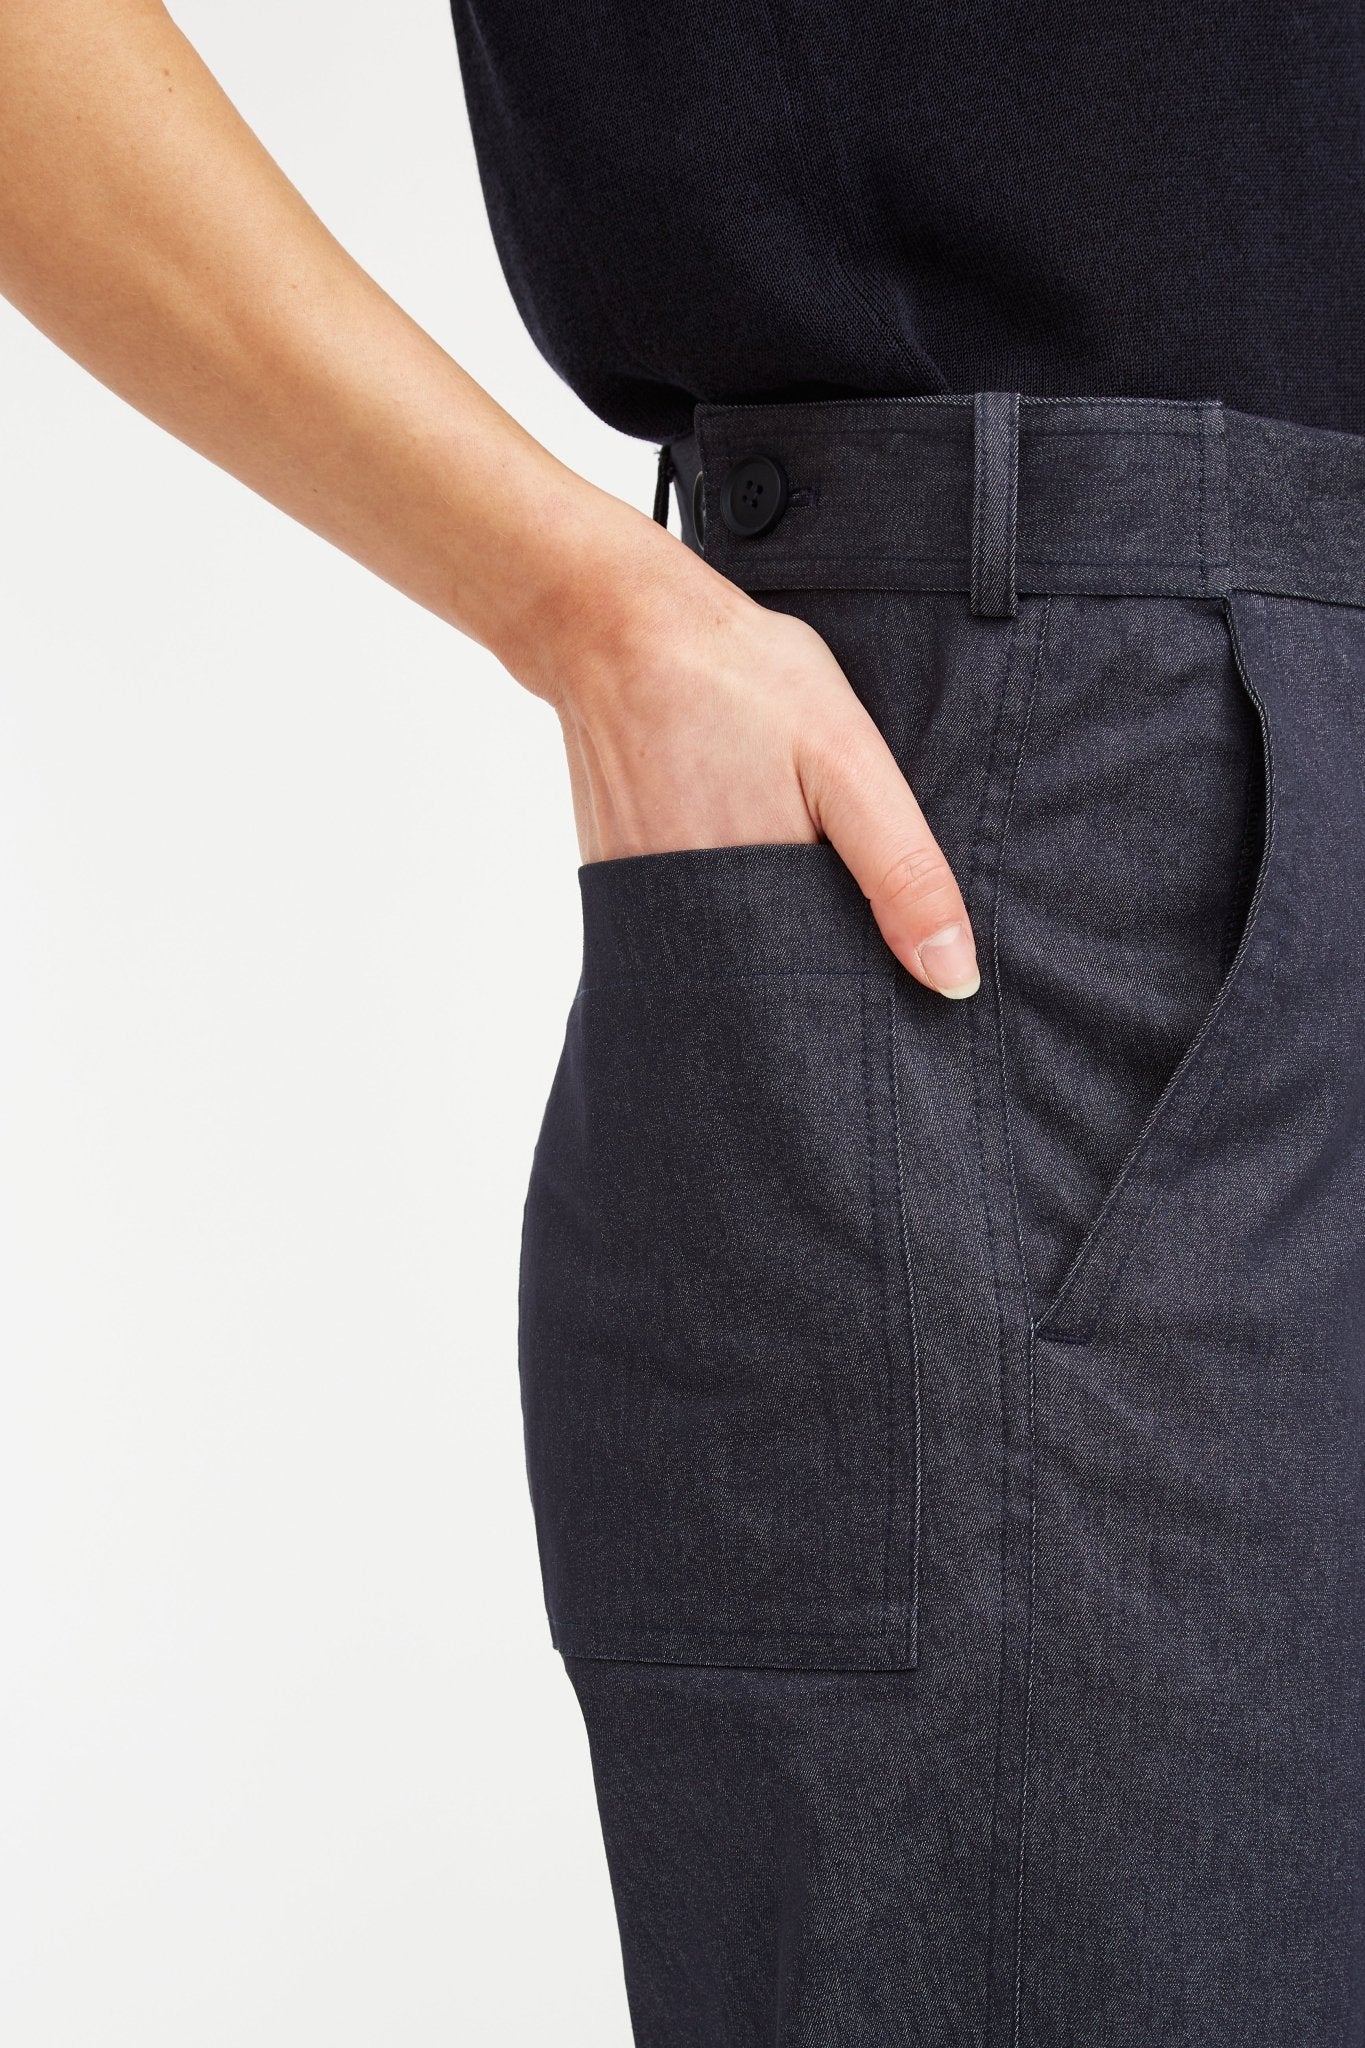 GEORGIA PANT IN TECHNICAL STRETCH COTTON - Jarbo